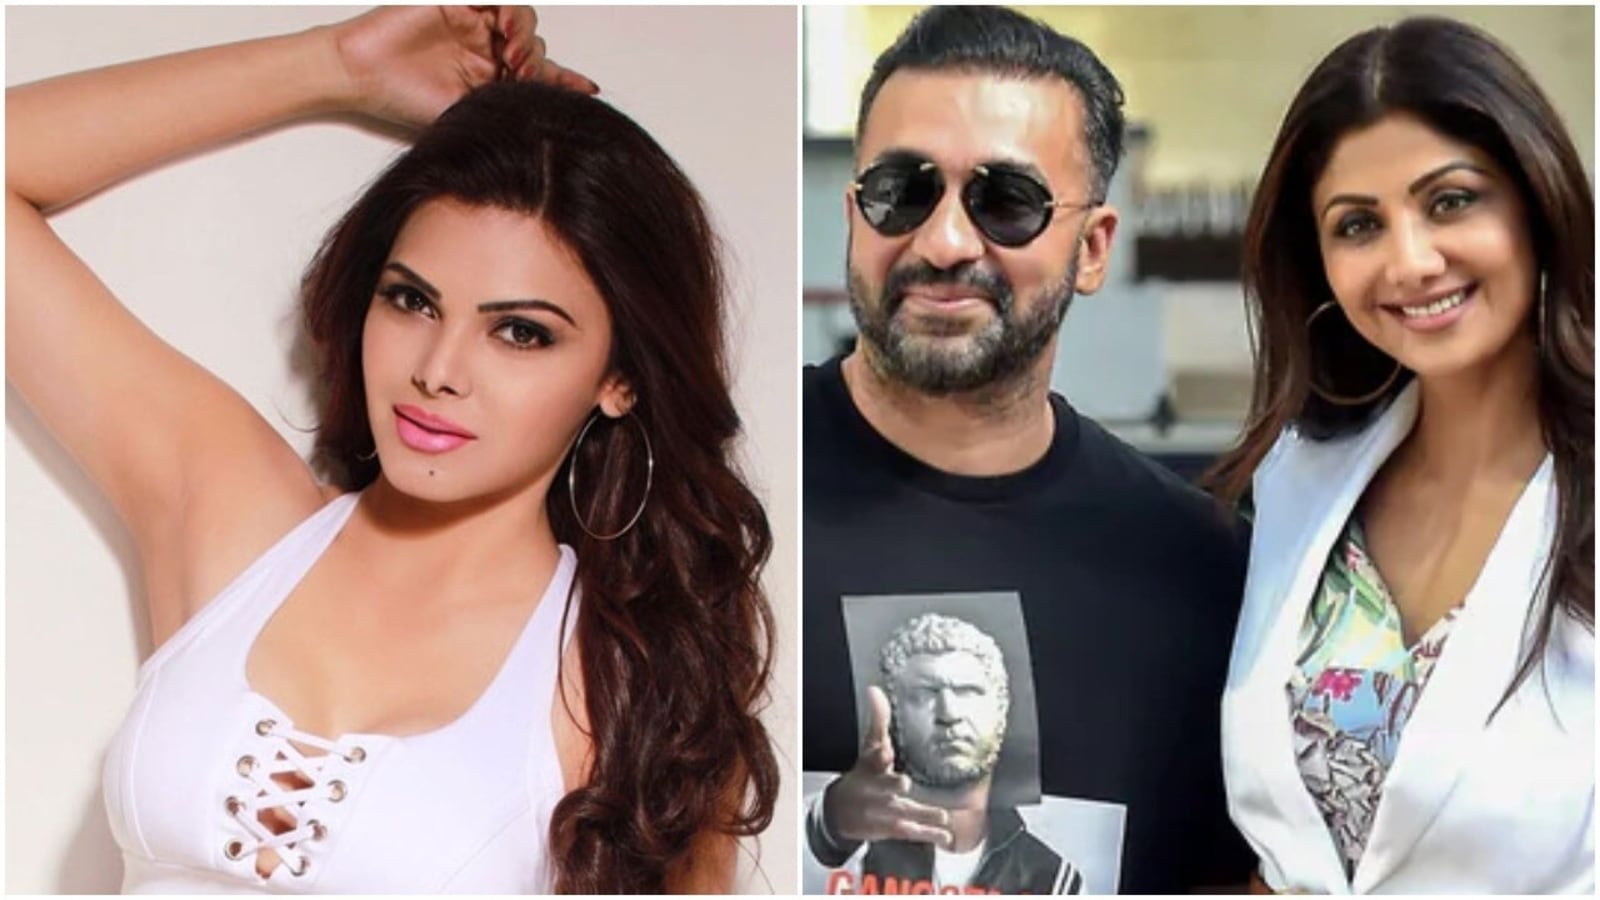 Gandhi Xxx Vedio - Sherlyn Chopra takes a dig at Poonam Pandey as she comments on Raj Kundra  porn case: 'I was the first to give statement' | Bollywood - Hindustan Times